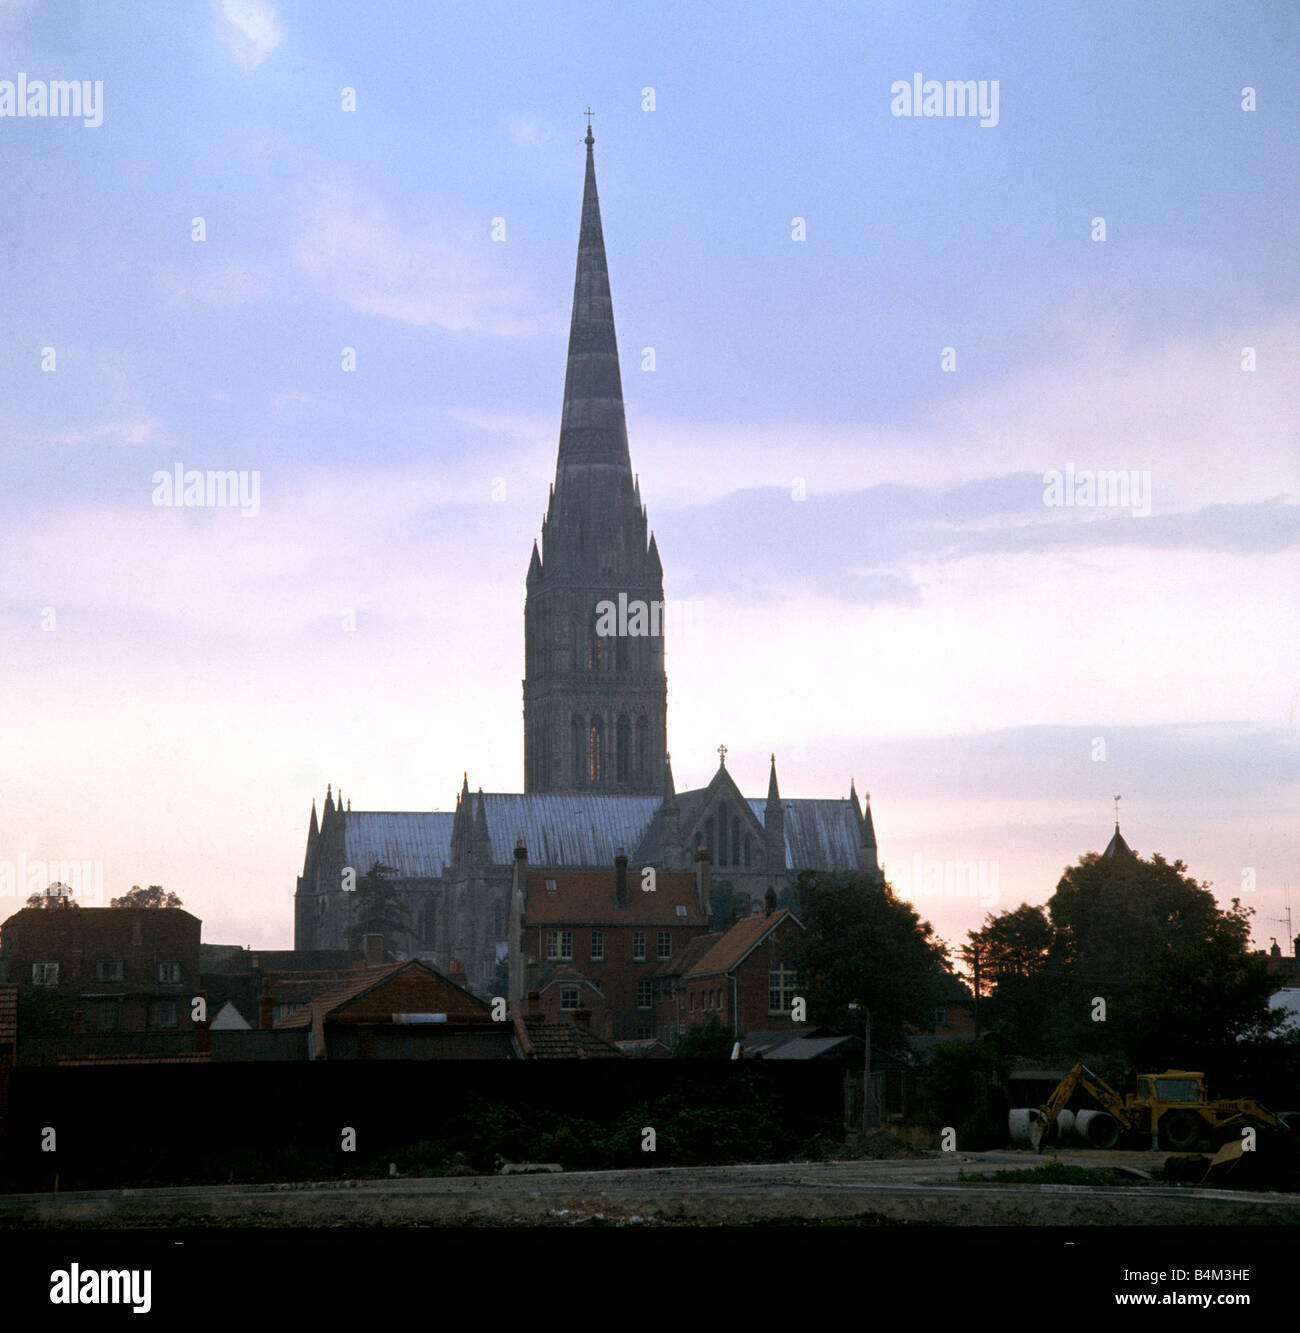 Sunset on Salisbury Cathedral Architecture Religion Dusk England August 1966 1960s Mirrorpix D Smith CR 3024 Stock Photo